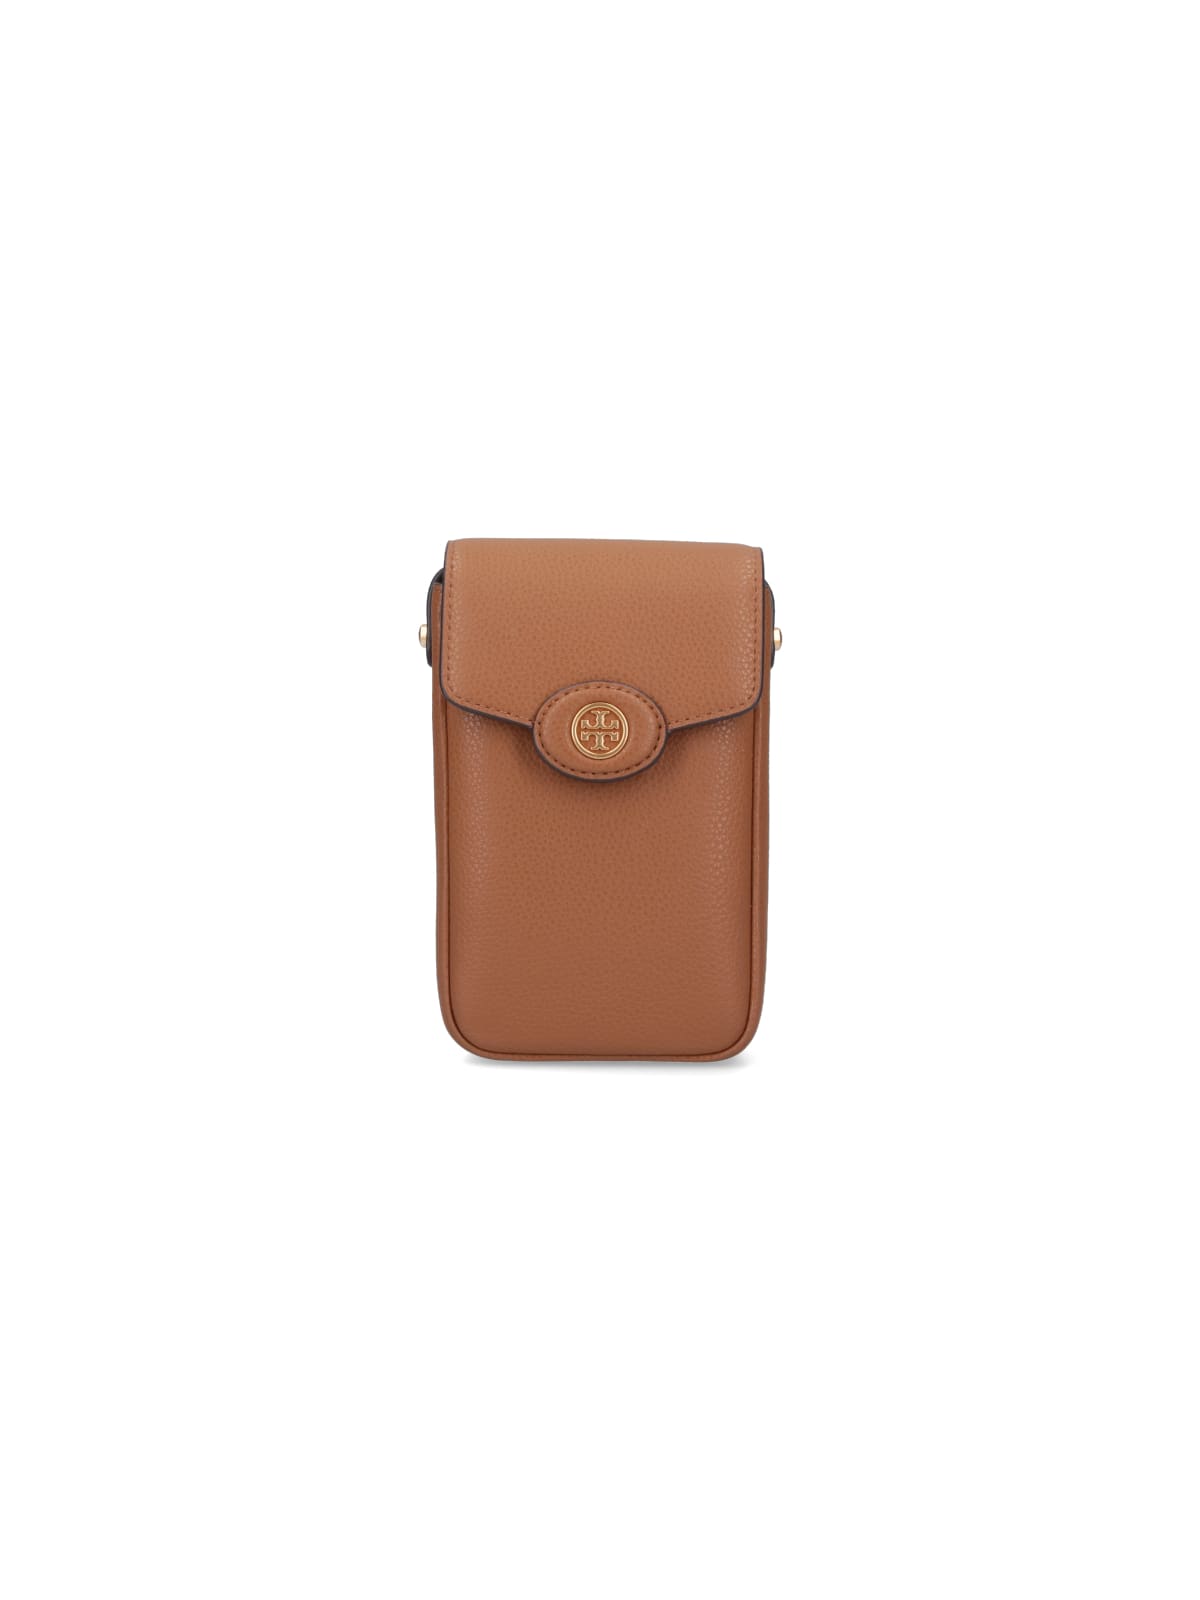 Tory Burch Robinson Smartphone Holder In Brown